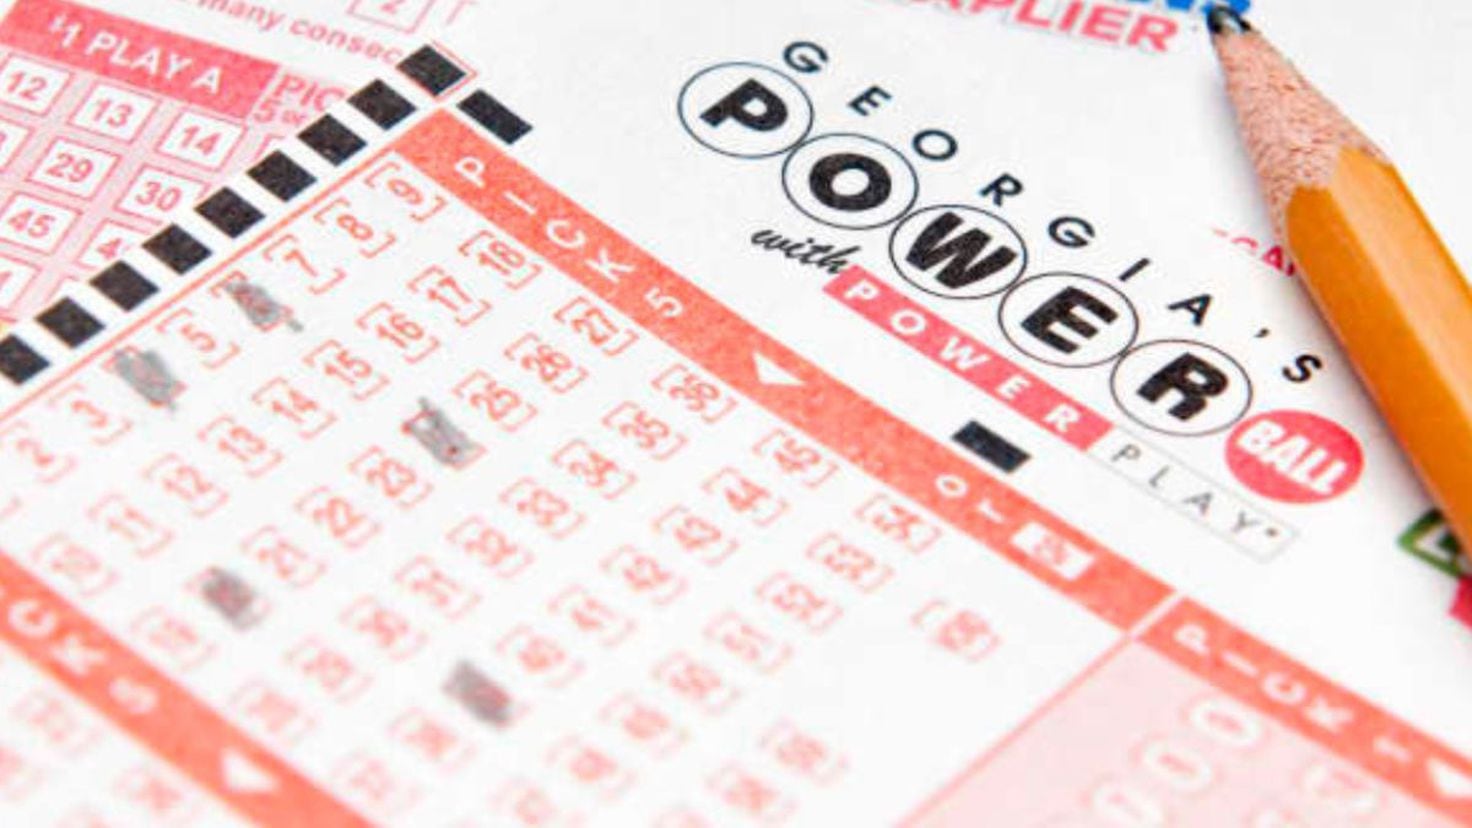 What are the winning numbers for Saturday’s 124 million Powerball